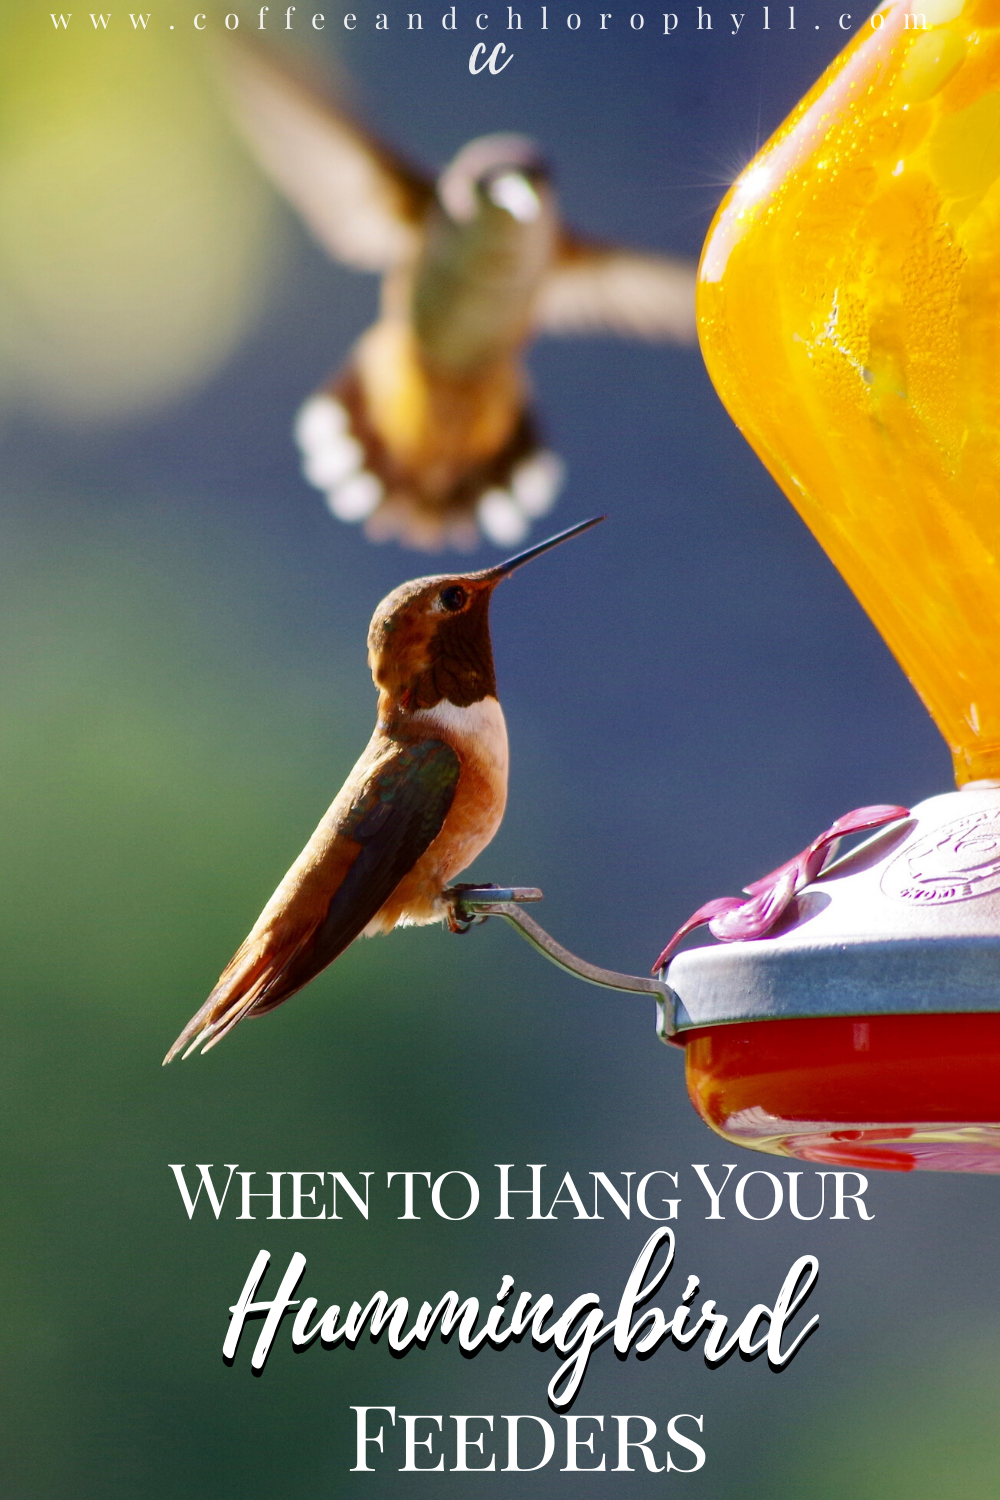 It's Time to Hang your Hummingbird Feeders — Coffee & Chlorophyll